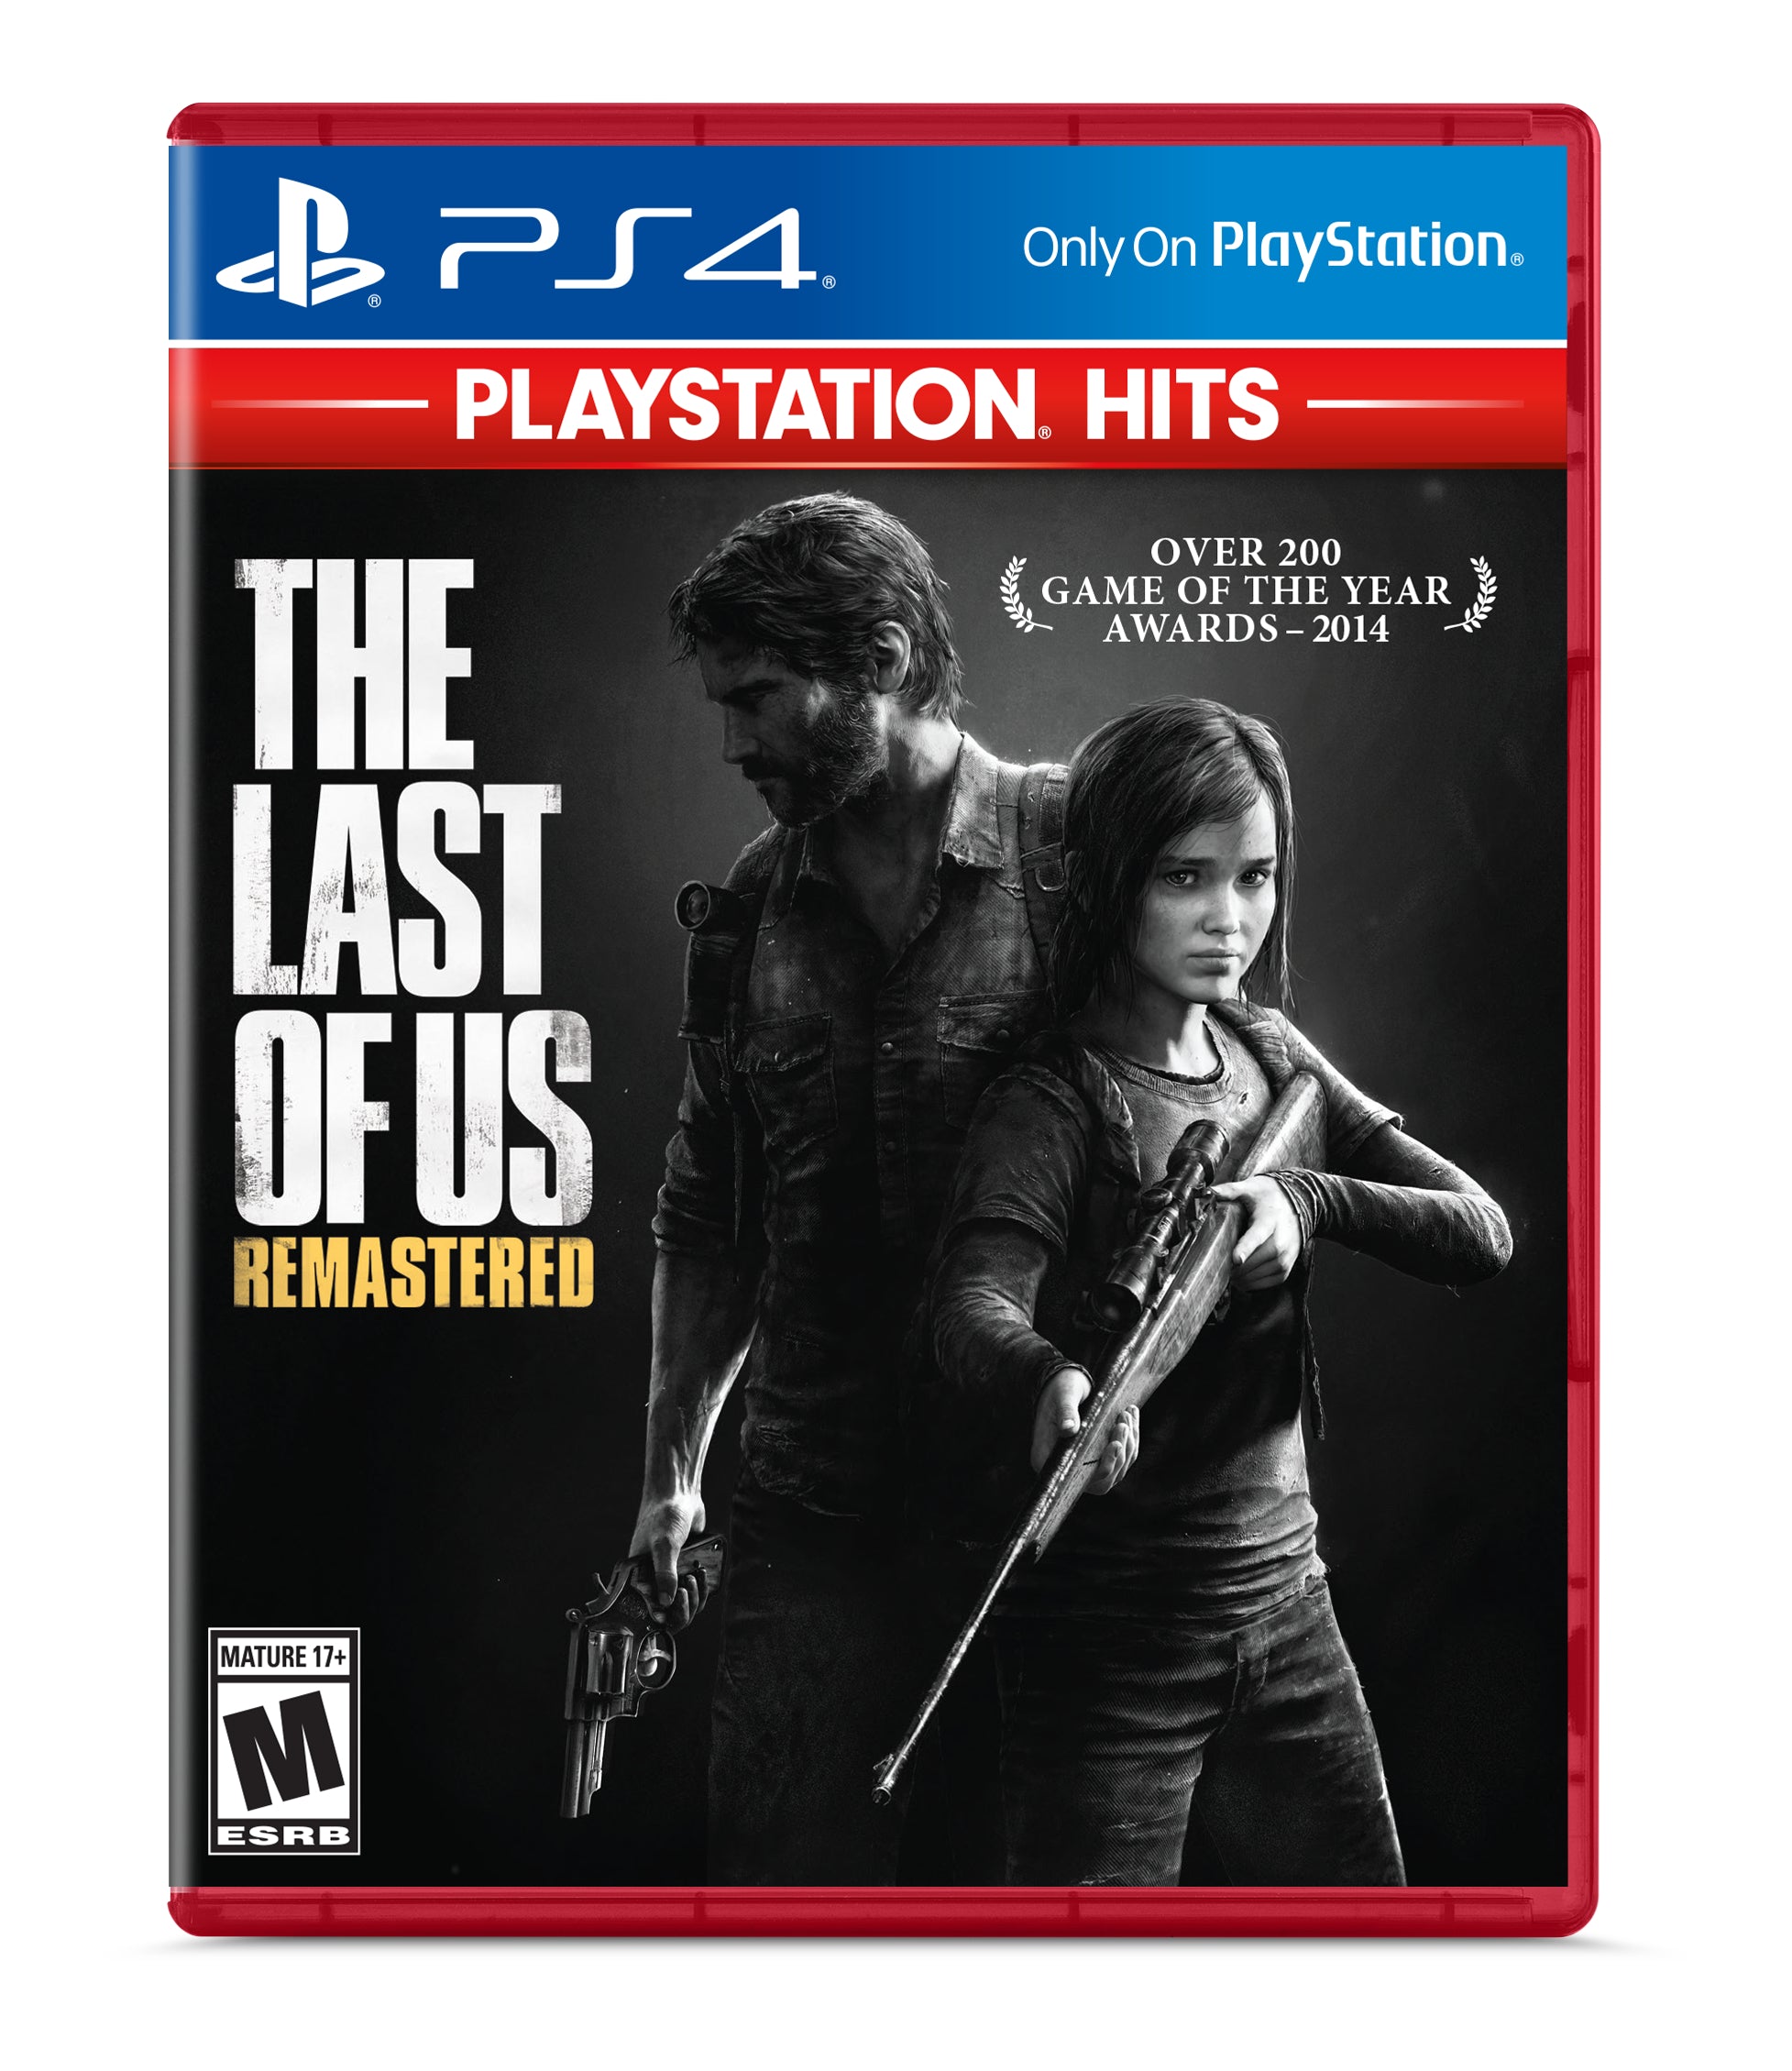 Sony PlayStation 4 Slim The Last of Us: Remastered Bundle Upgrade 2TB HDD PS4 Gaming Console, Jet Black, with Mytrix Chat Headset - Large Capacity Internal Hard Drive Enhanced PS4 Console